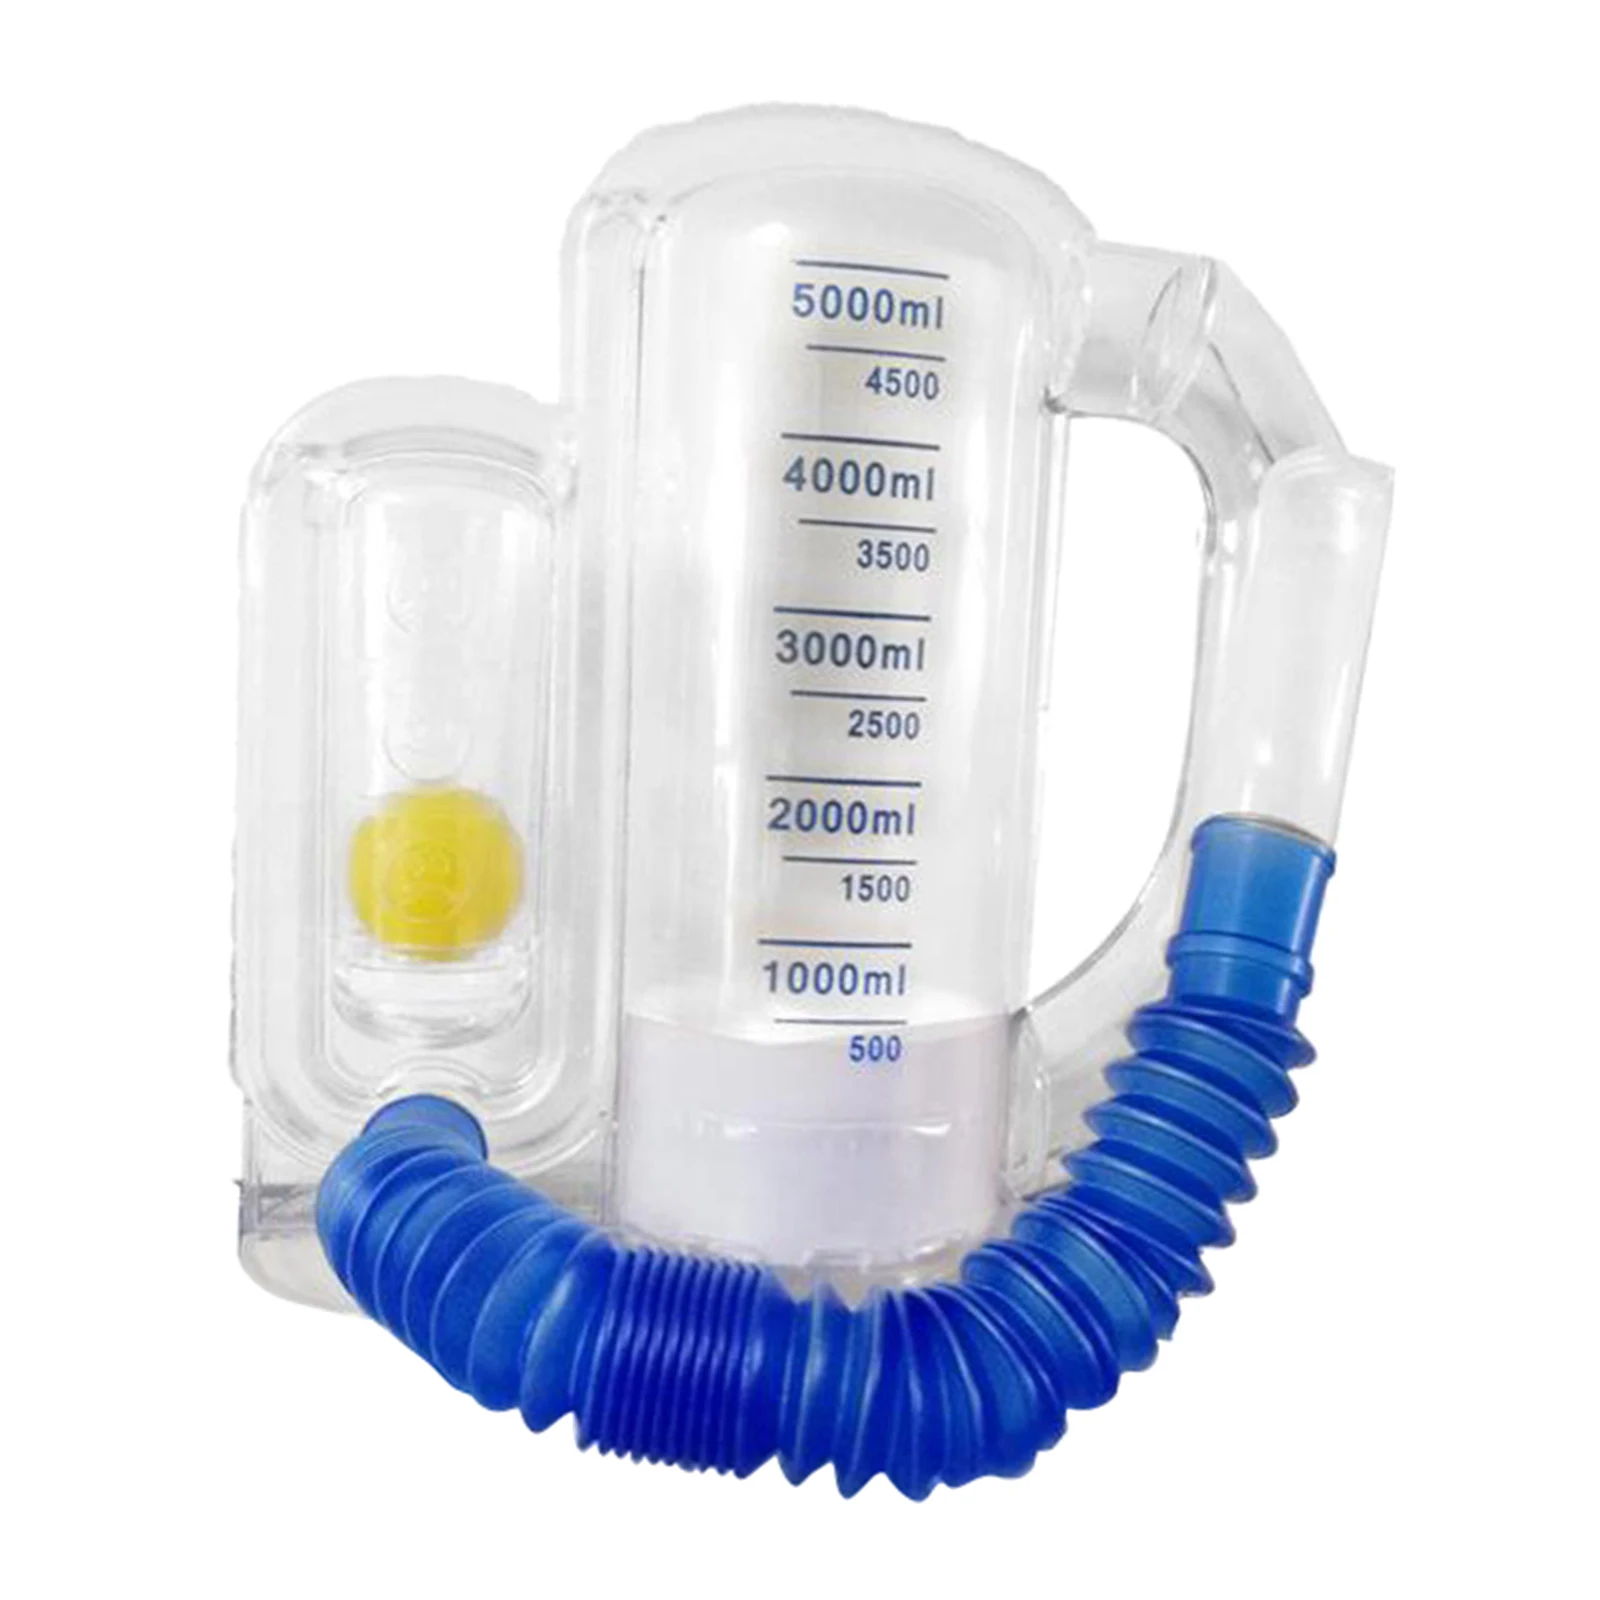 Care Deep Breathing Lung Exerciser | Washable & Hygienic | Breath Measurement System